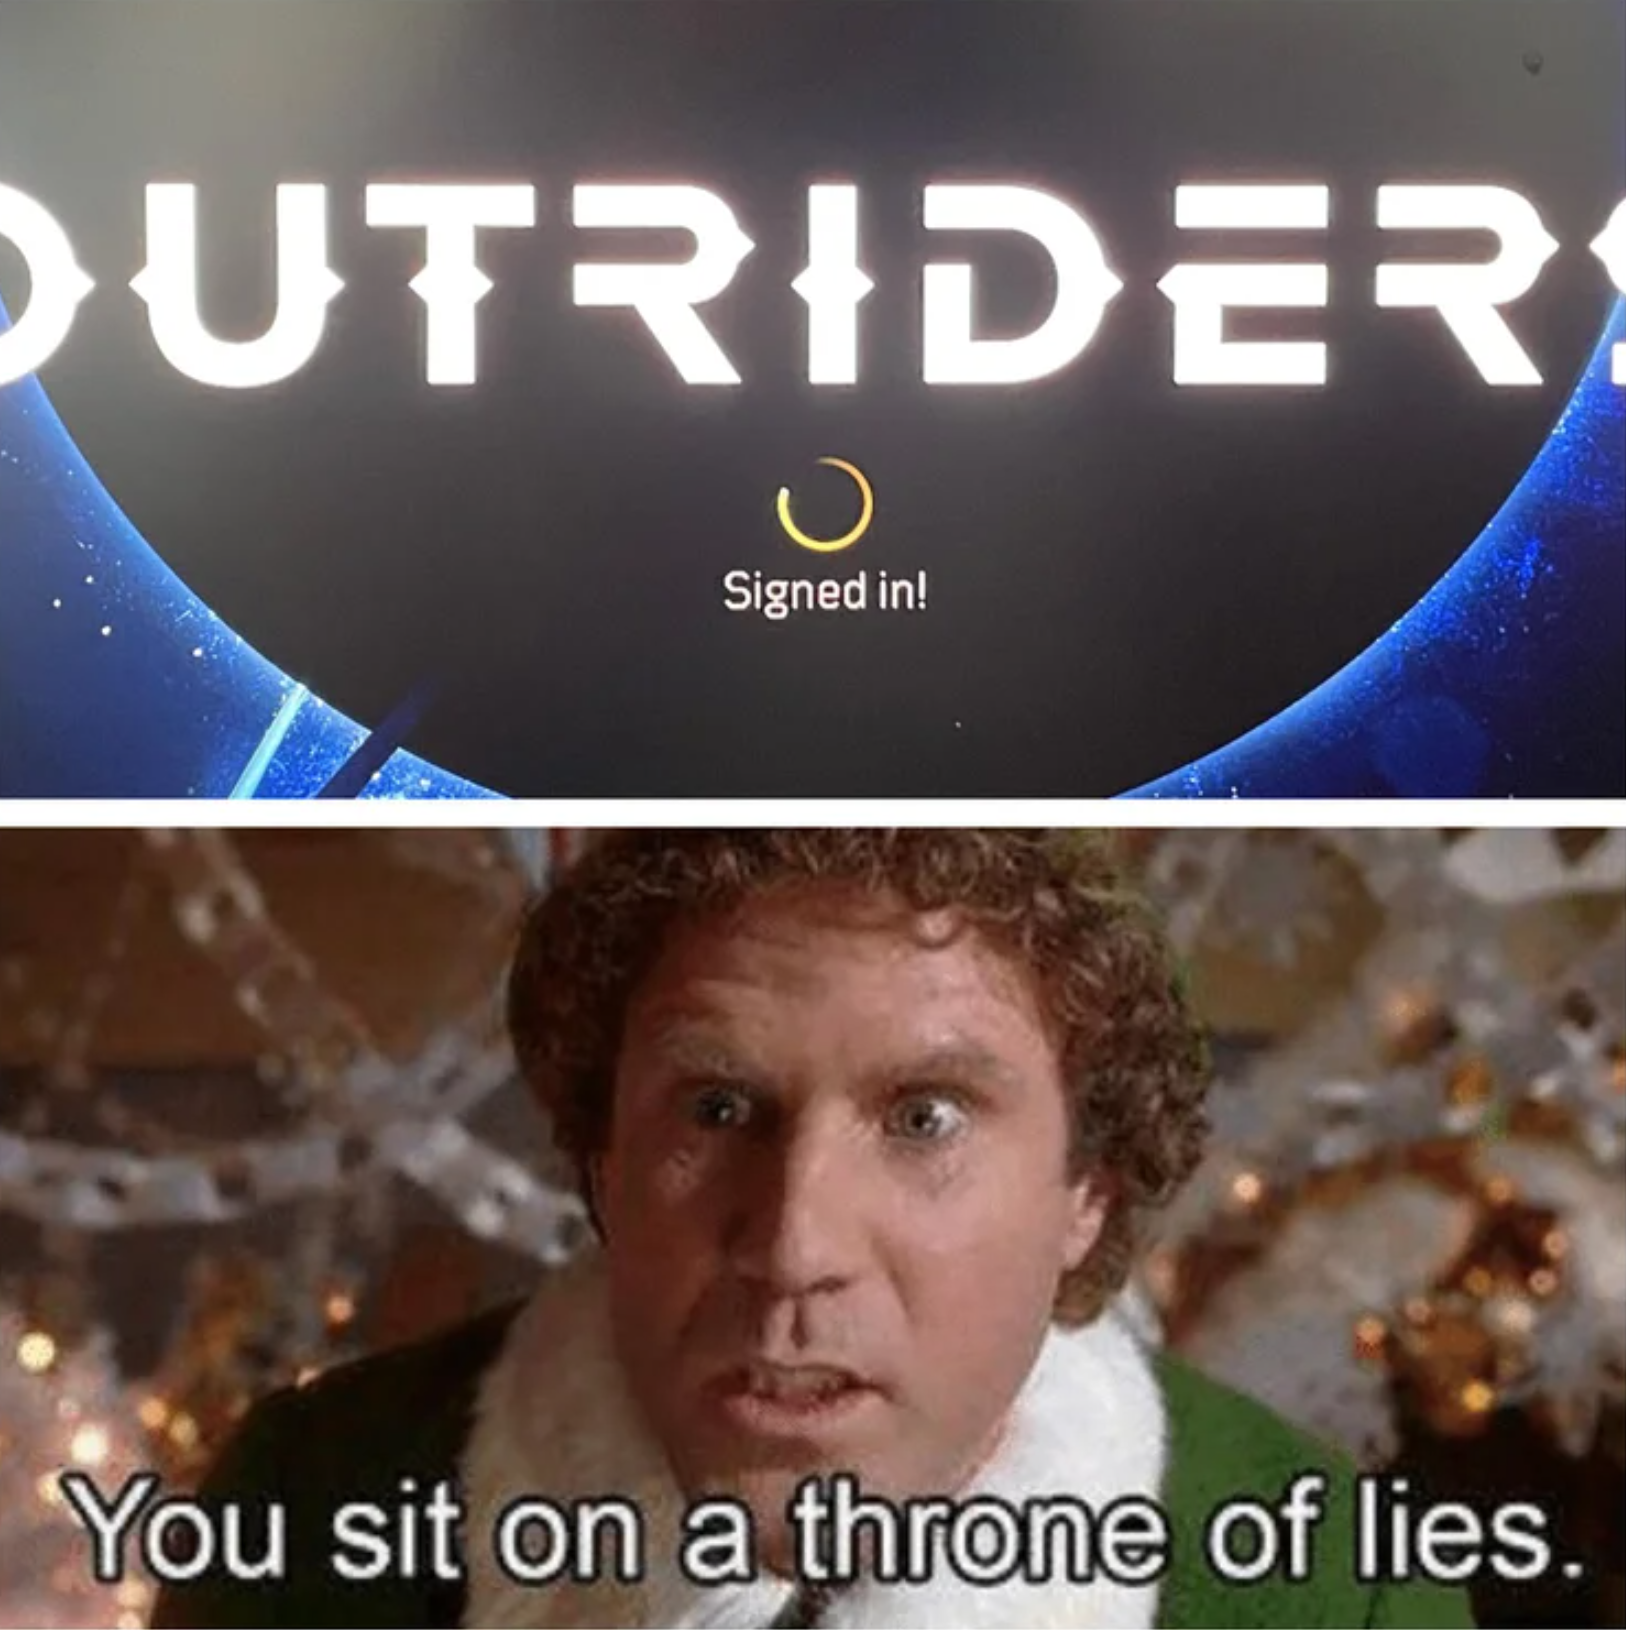 funny gaming memes - outrider ps4 - Dutrider Signed in! You sit on a throne of lies.